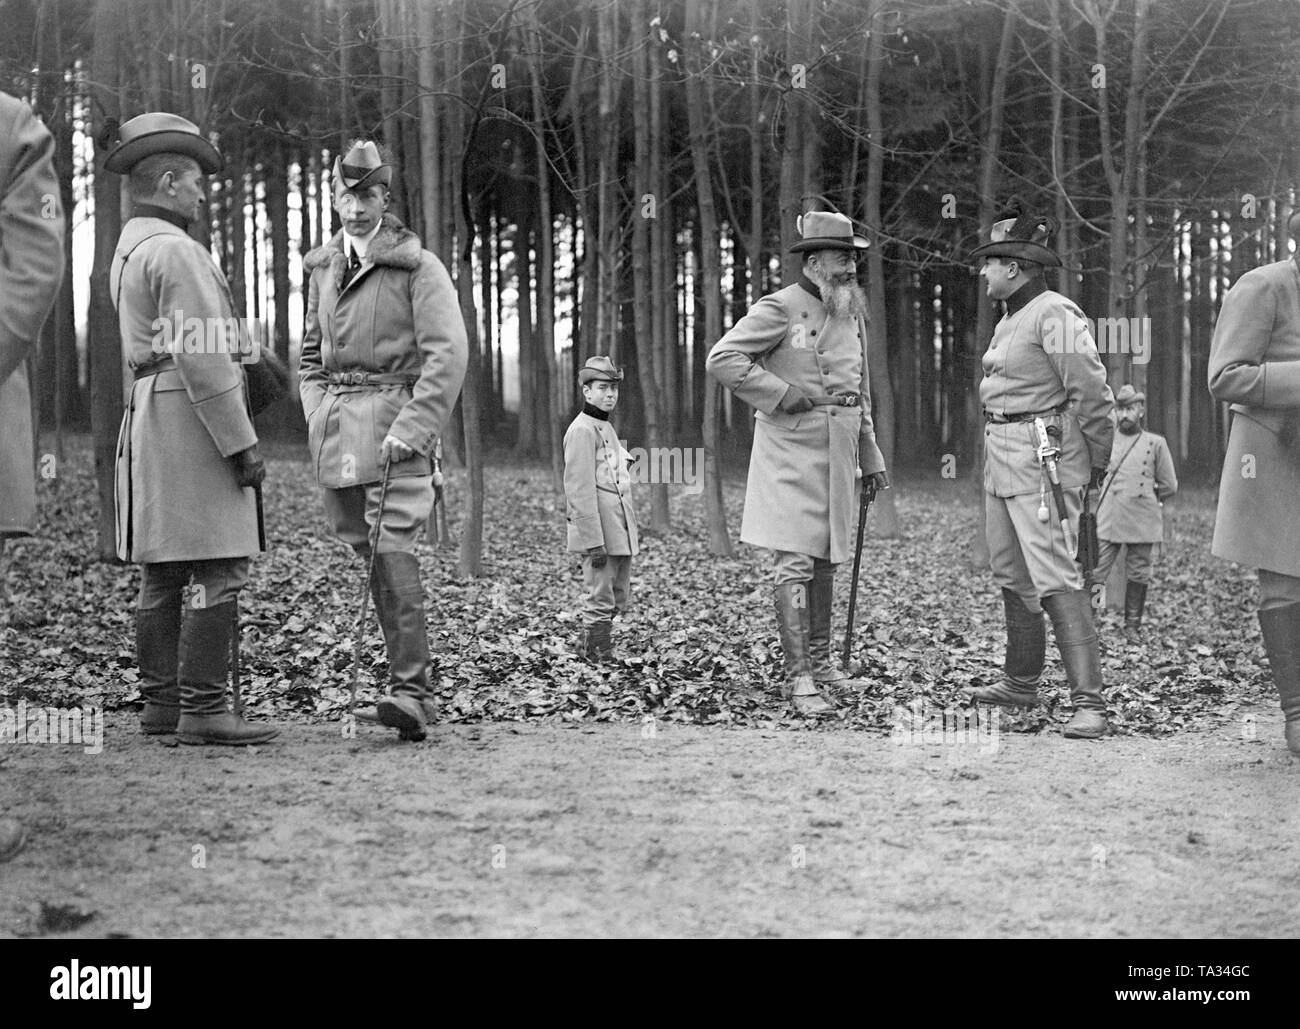 Crown Prince Wilhelm of Prussia (3rd from the left), Admiral Alfred von Tirpitz (5th from the left) and Prince Eitel Friedrich (2nd from the right) while hunting. Stock Photo